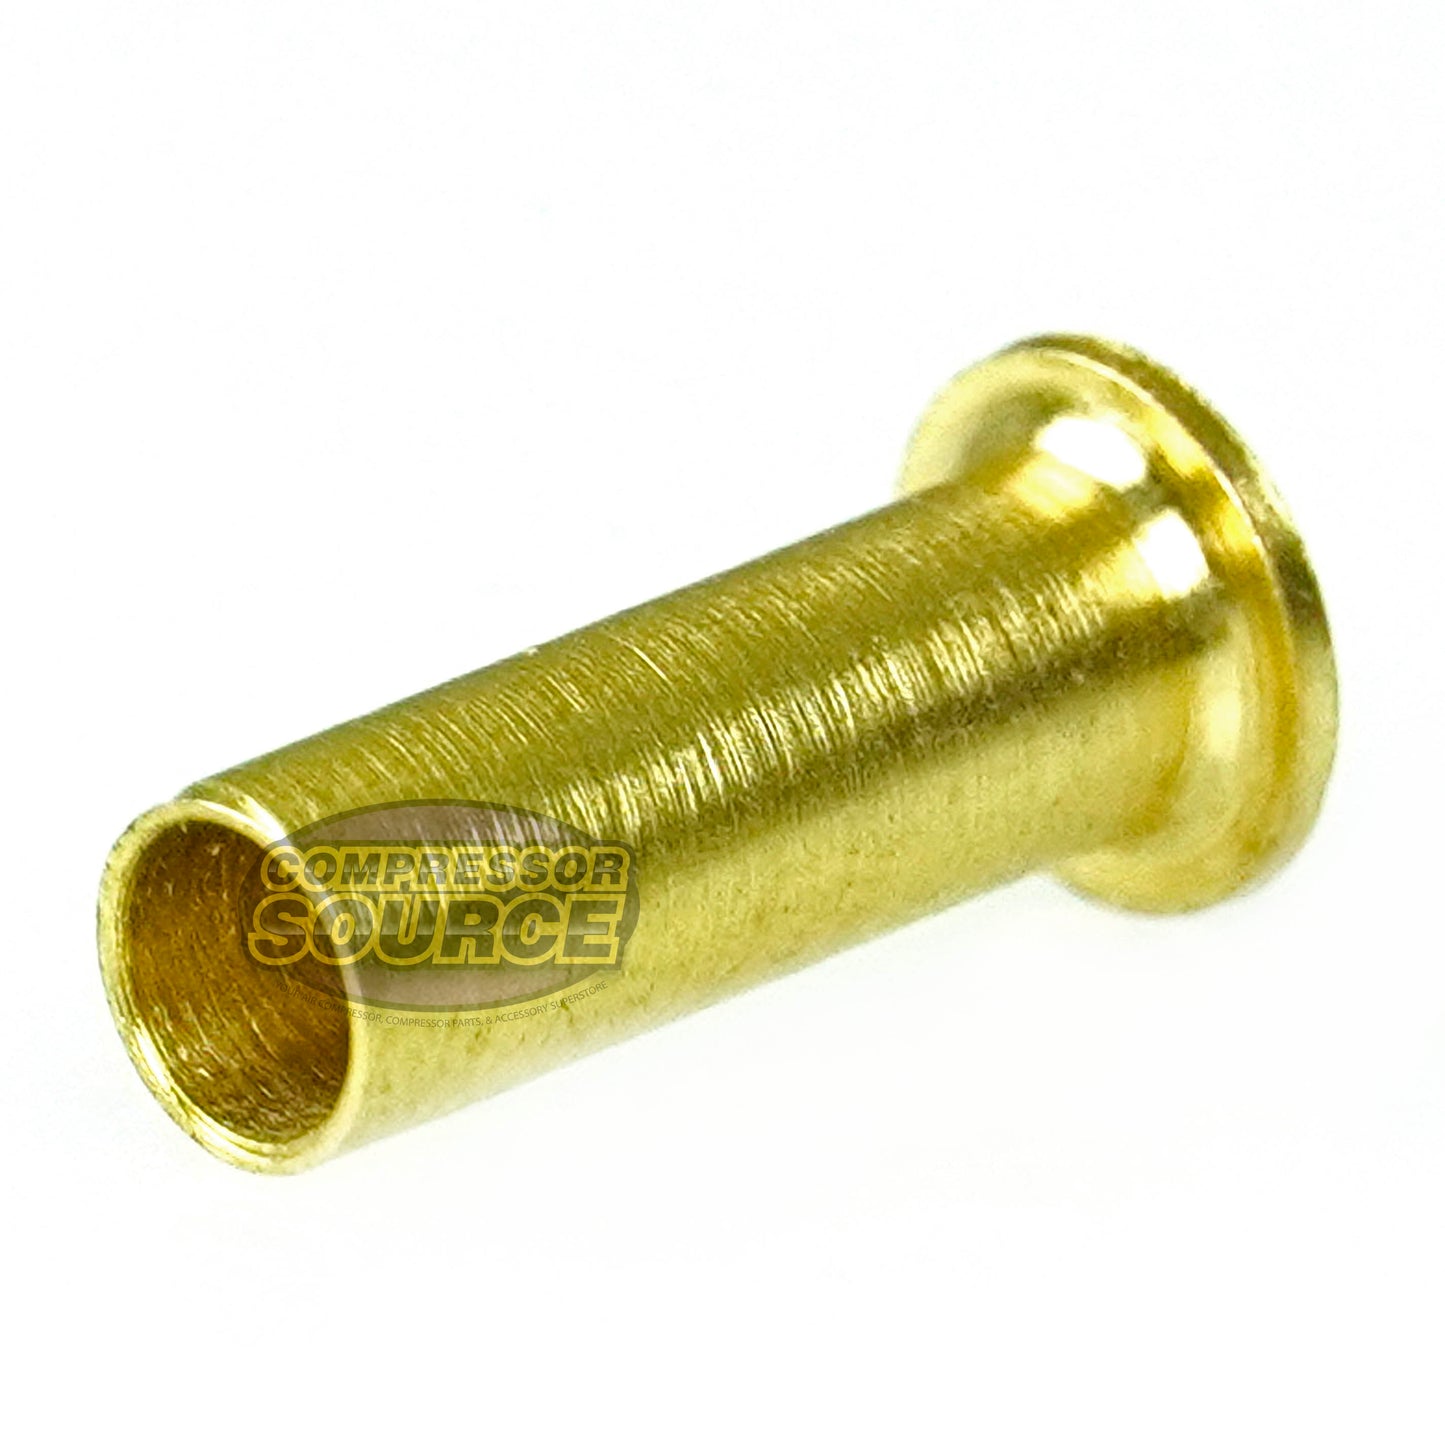 1/4" Brass Compression Insert Fitting For Water Fuel Oil Applications 10-Pack